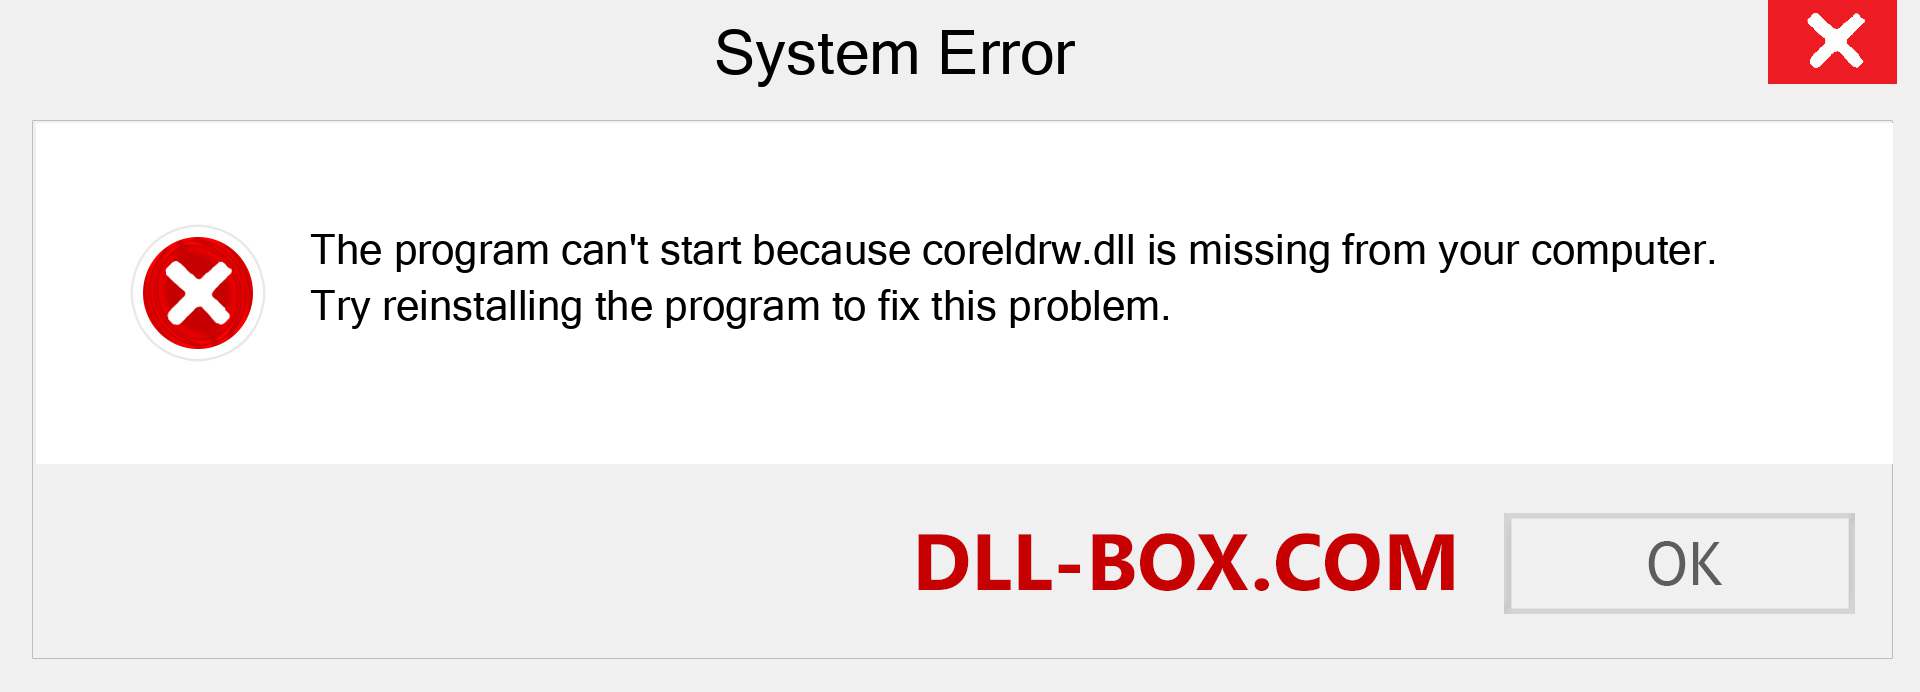  coreldrw.dll file is missing?. Download for Windows 7, 8, 10 - Fix  coreldrw dll Missing Error on Windows, photos, images